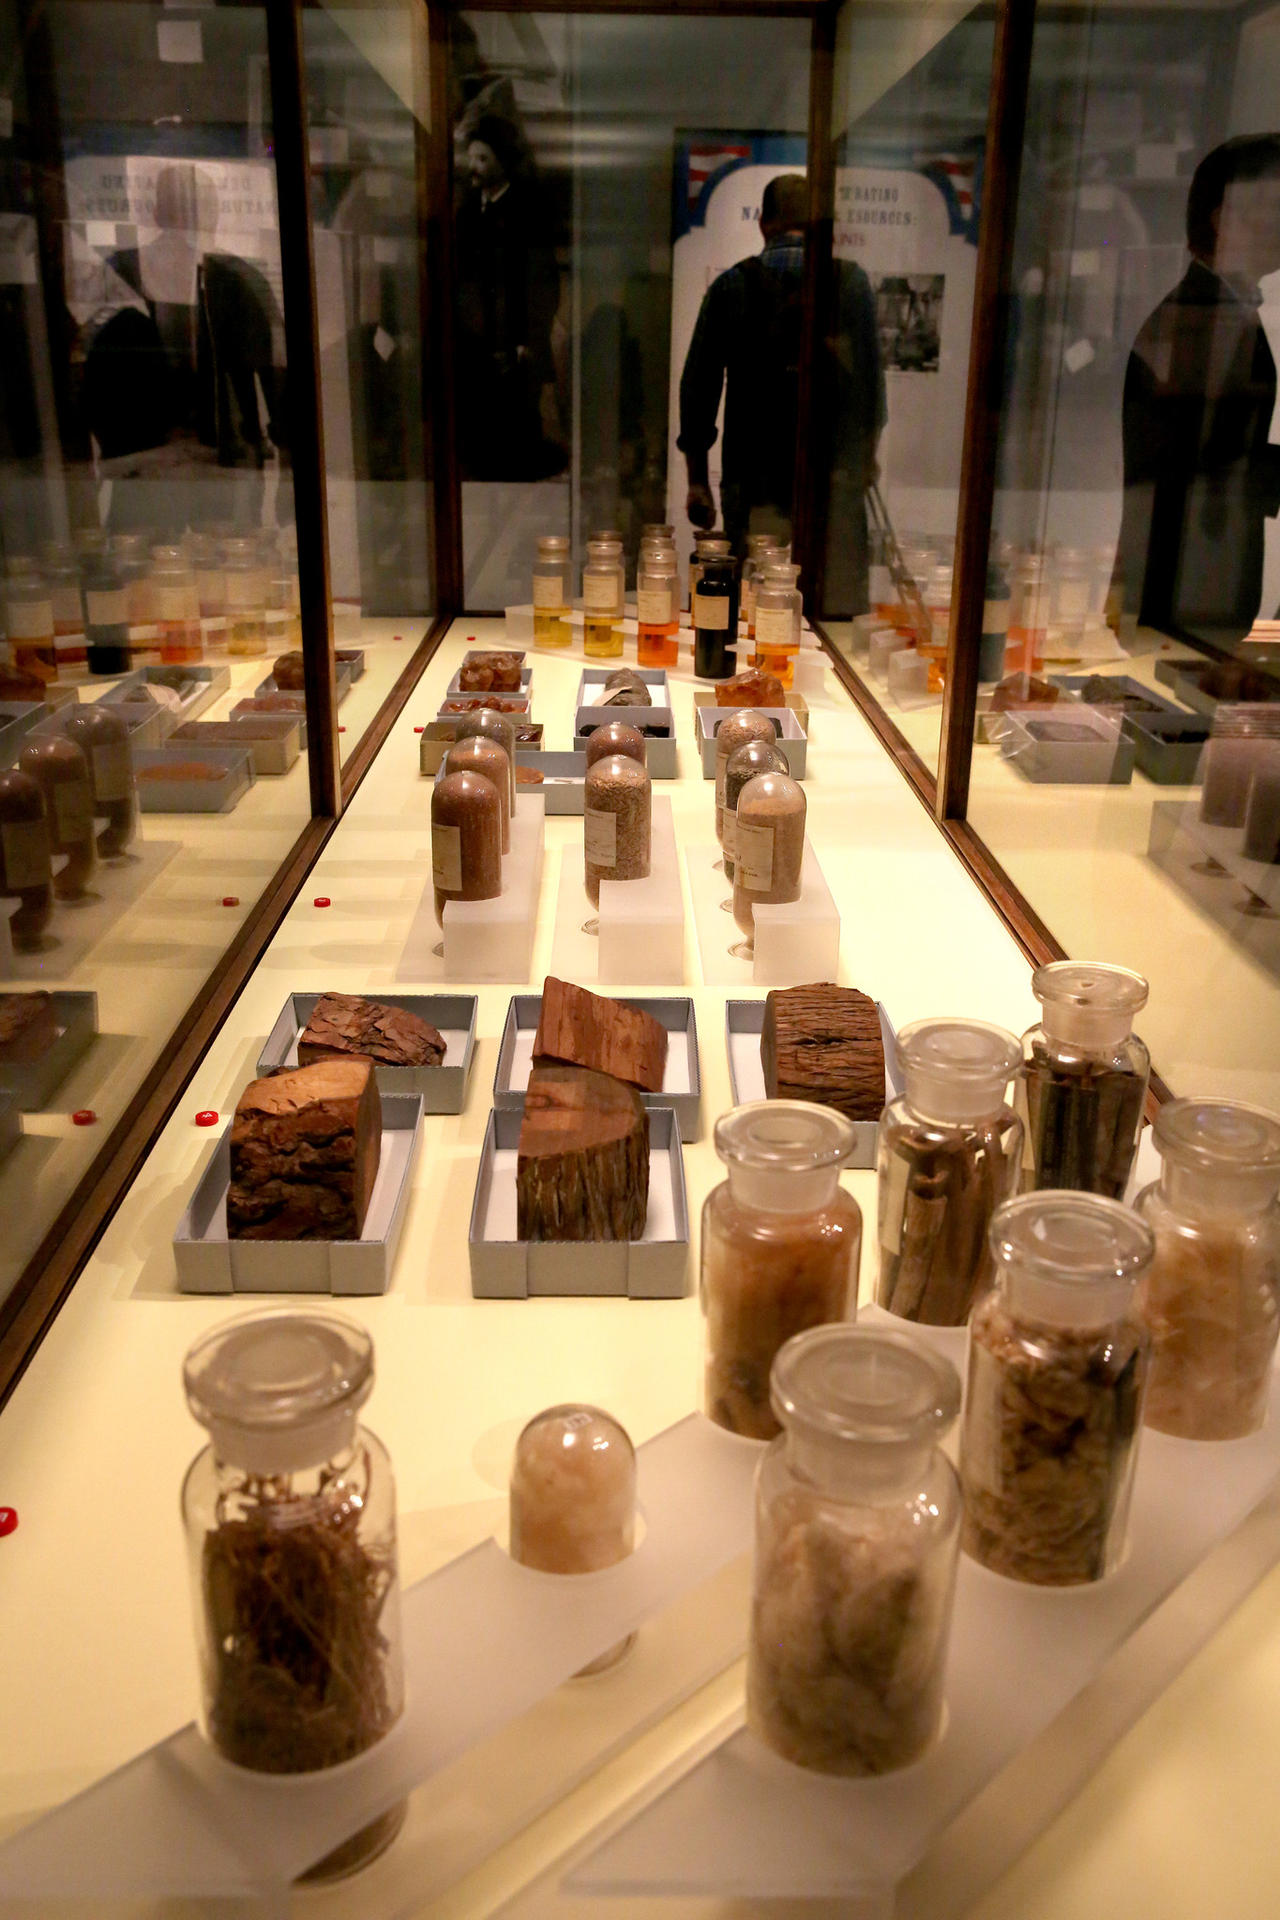 A case full of an array of oils, resins, wood and fibers on display at the fair.